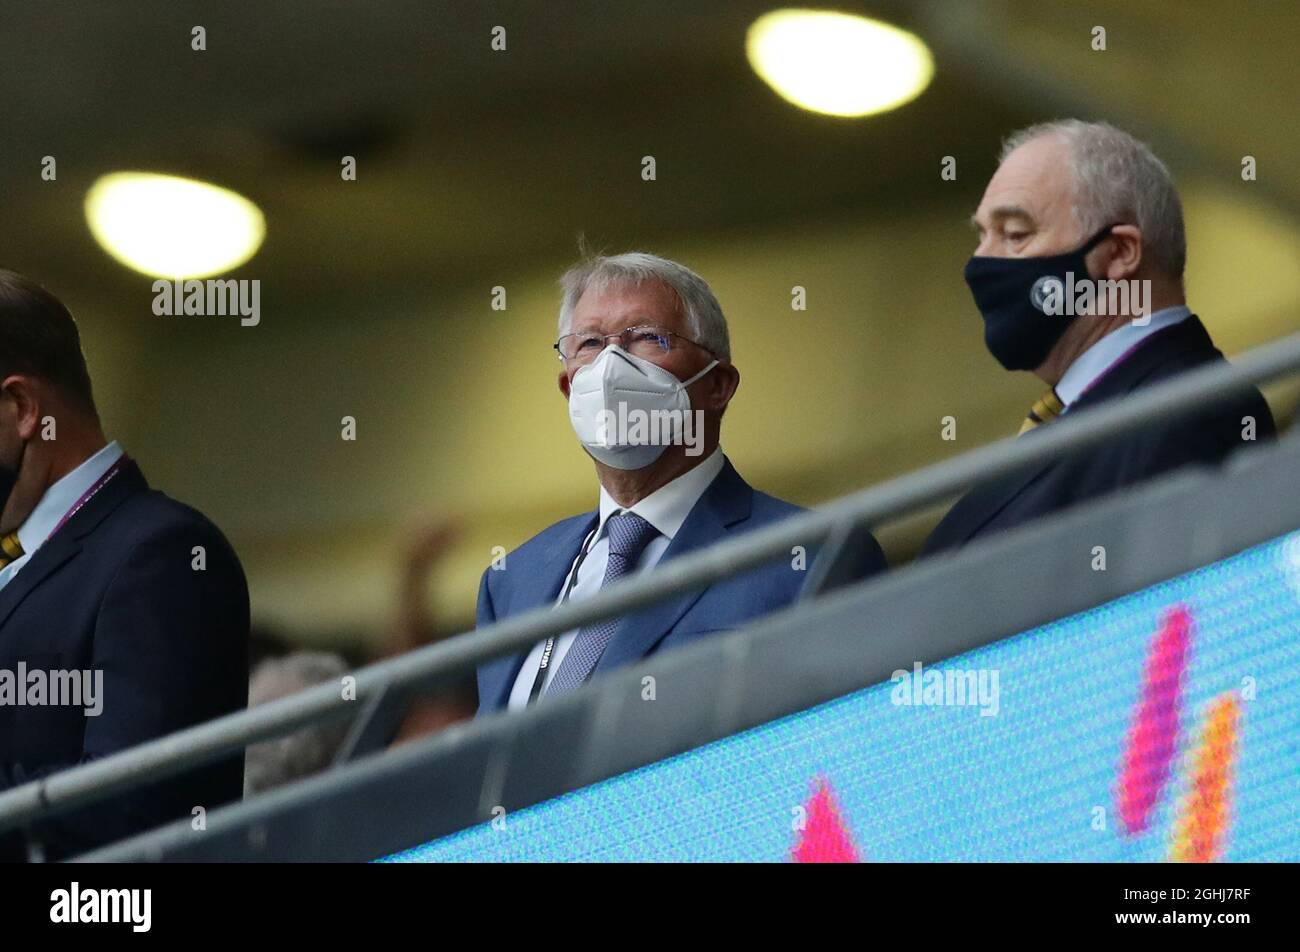 London, England, 18th June 2021. Sir Alex Ferguson the former Manchester United manager takes his seat to watch the game during the UEFA European Championships match at Wembley Stadium, London. Picture credit should read: David Klein / Sportimage via PA Images Stock Photo